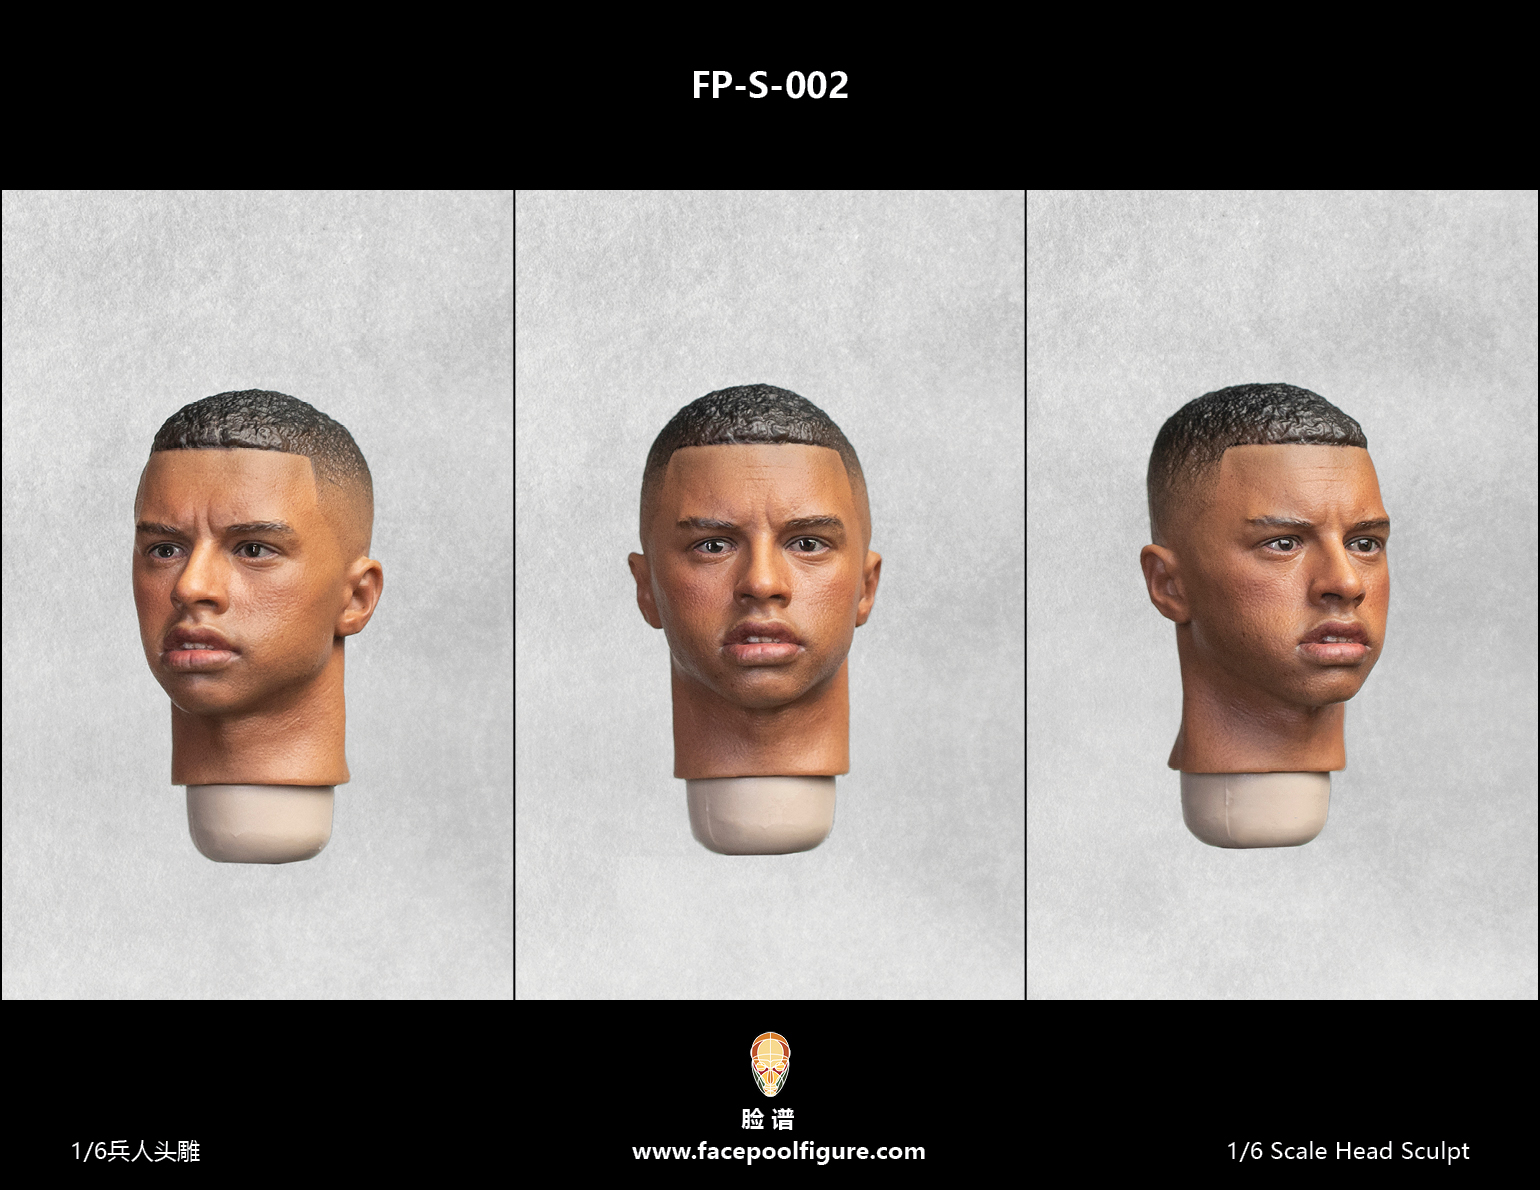 FacepoolFigure 1/6 Facepoolfigure Store Head Sculpt Expression – with FP-S-002 Black Online Male